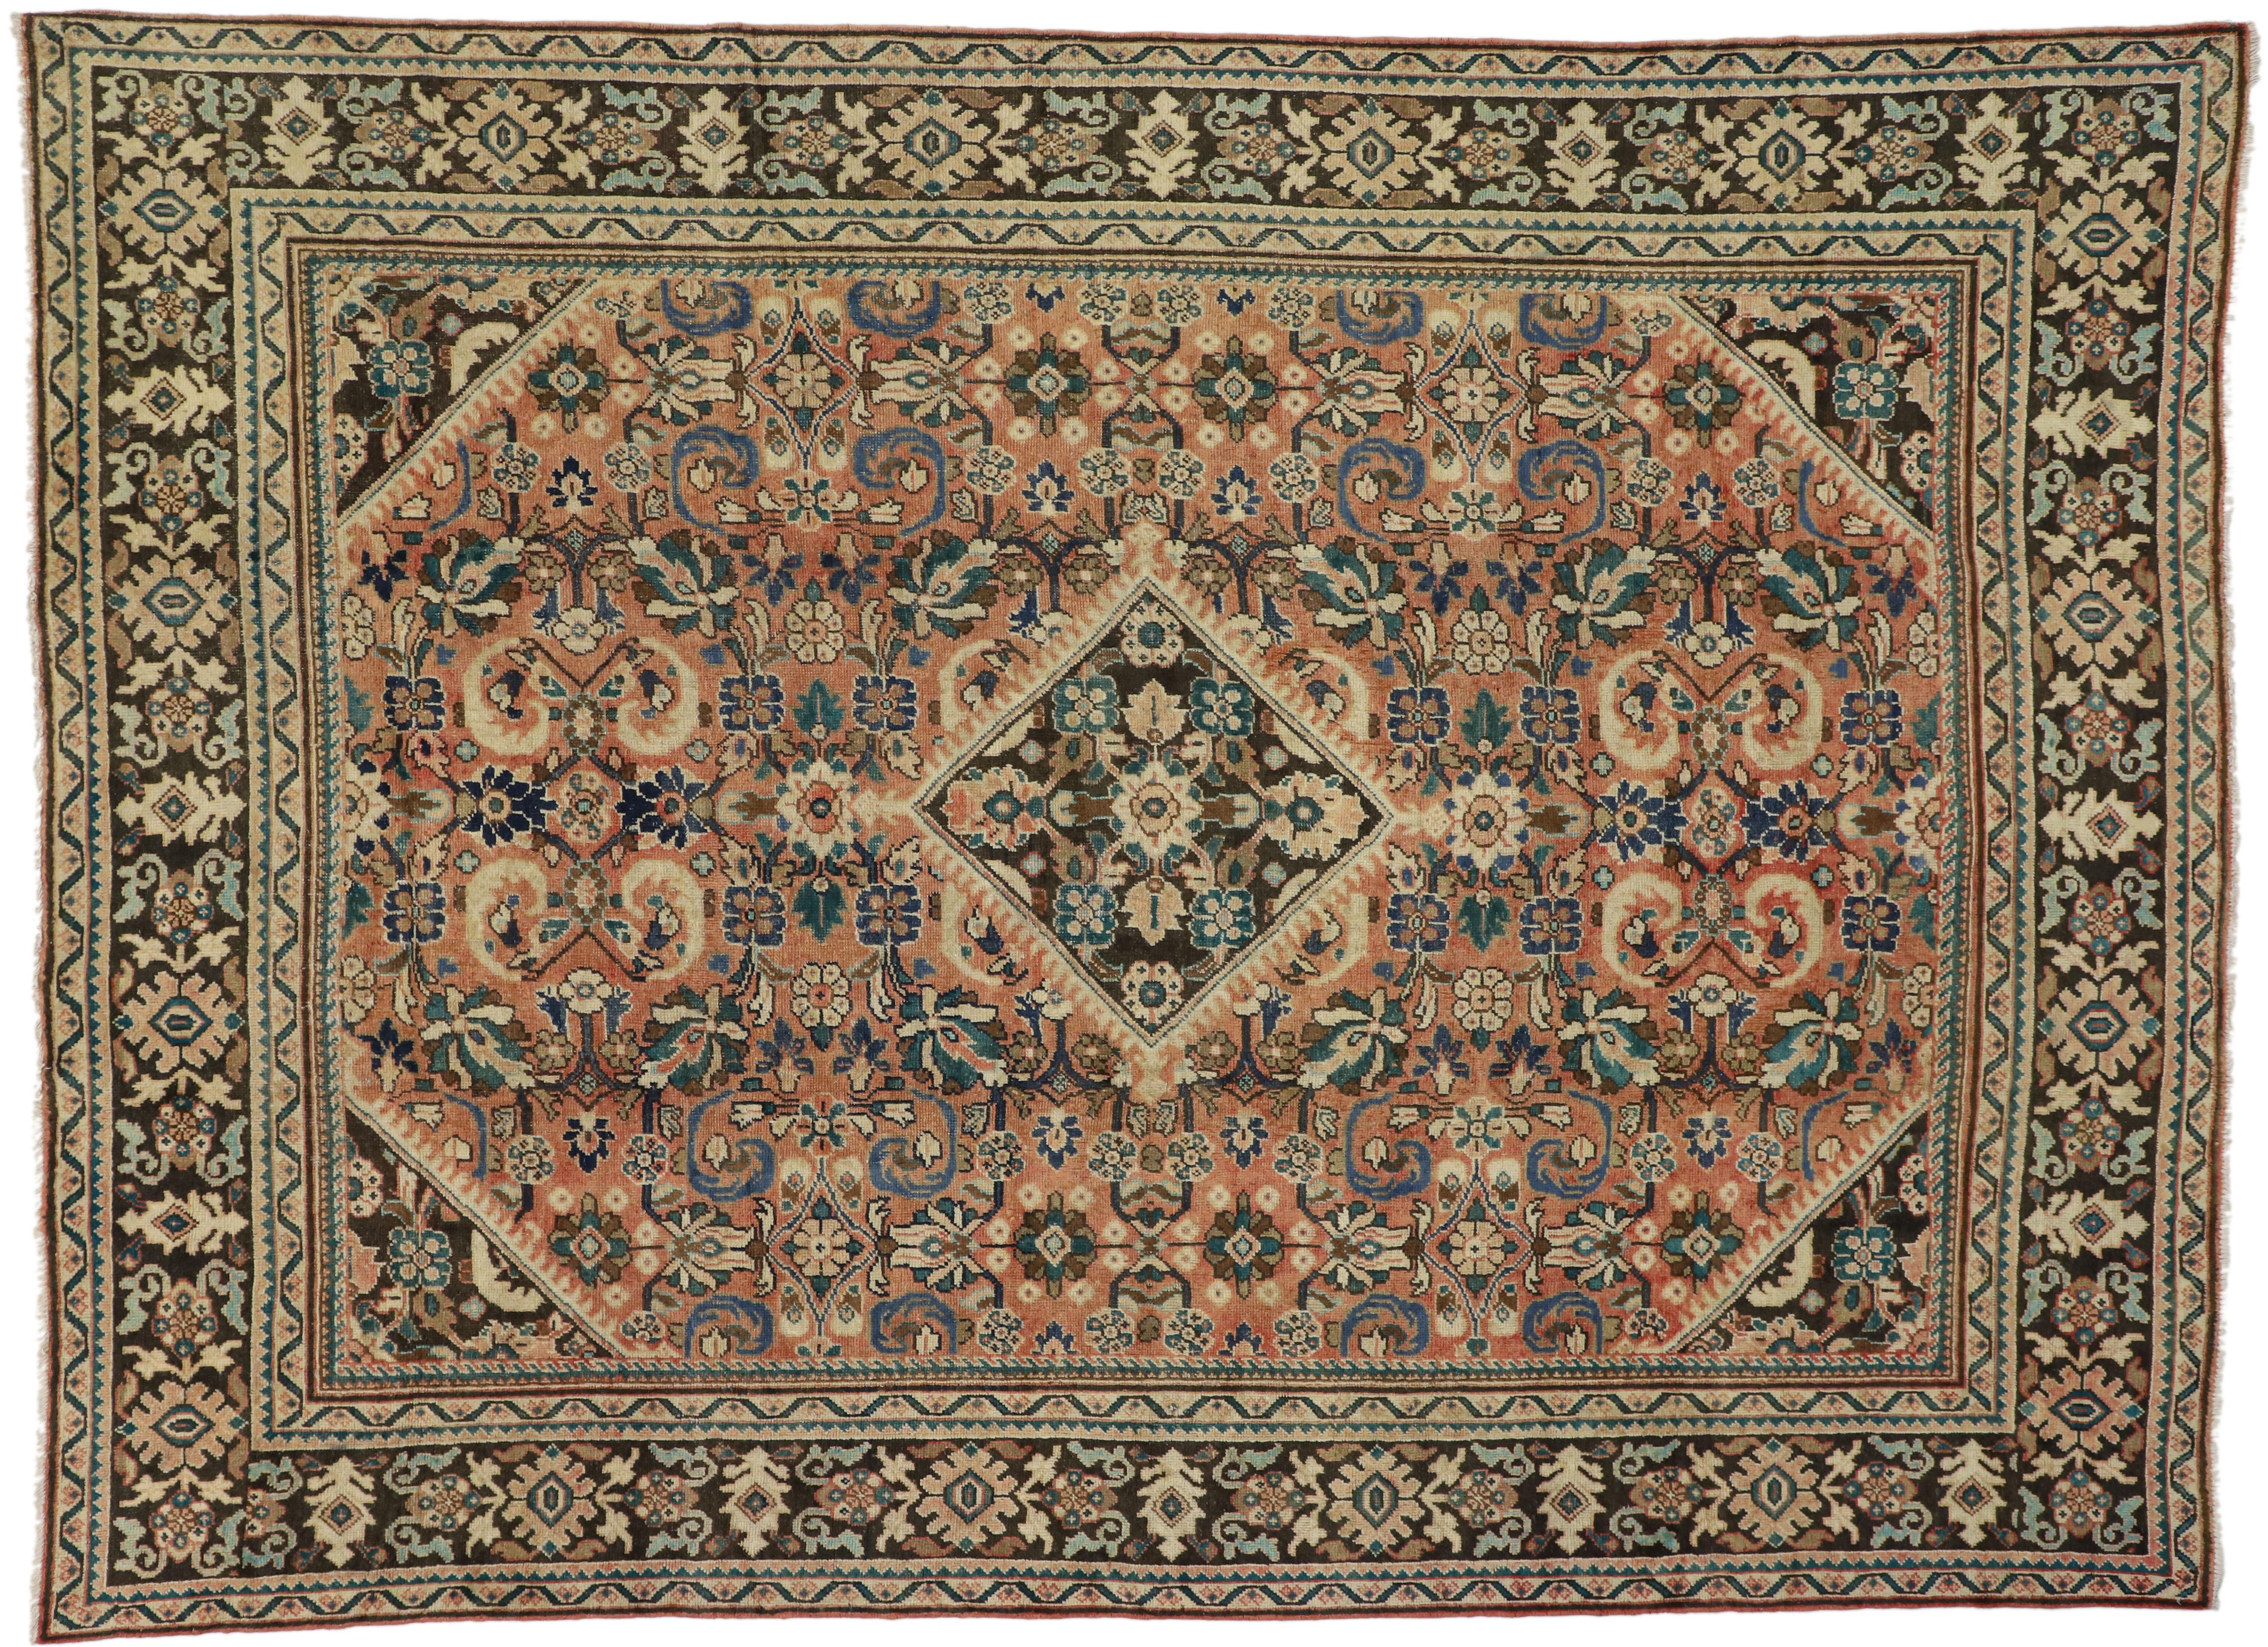 Antique Persian Mahal Rug with Arts & Crafts Style 2